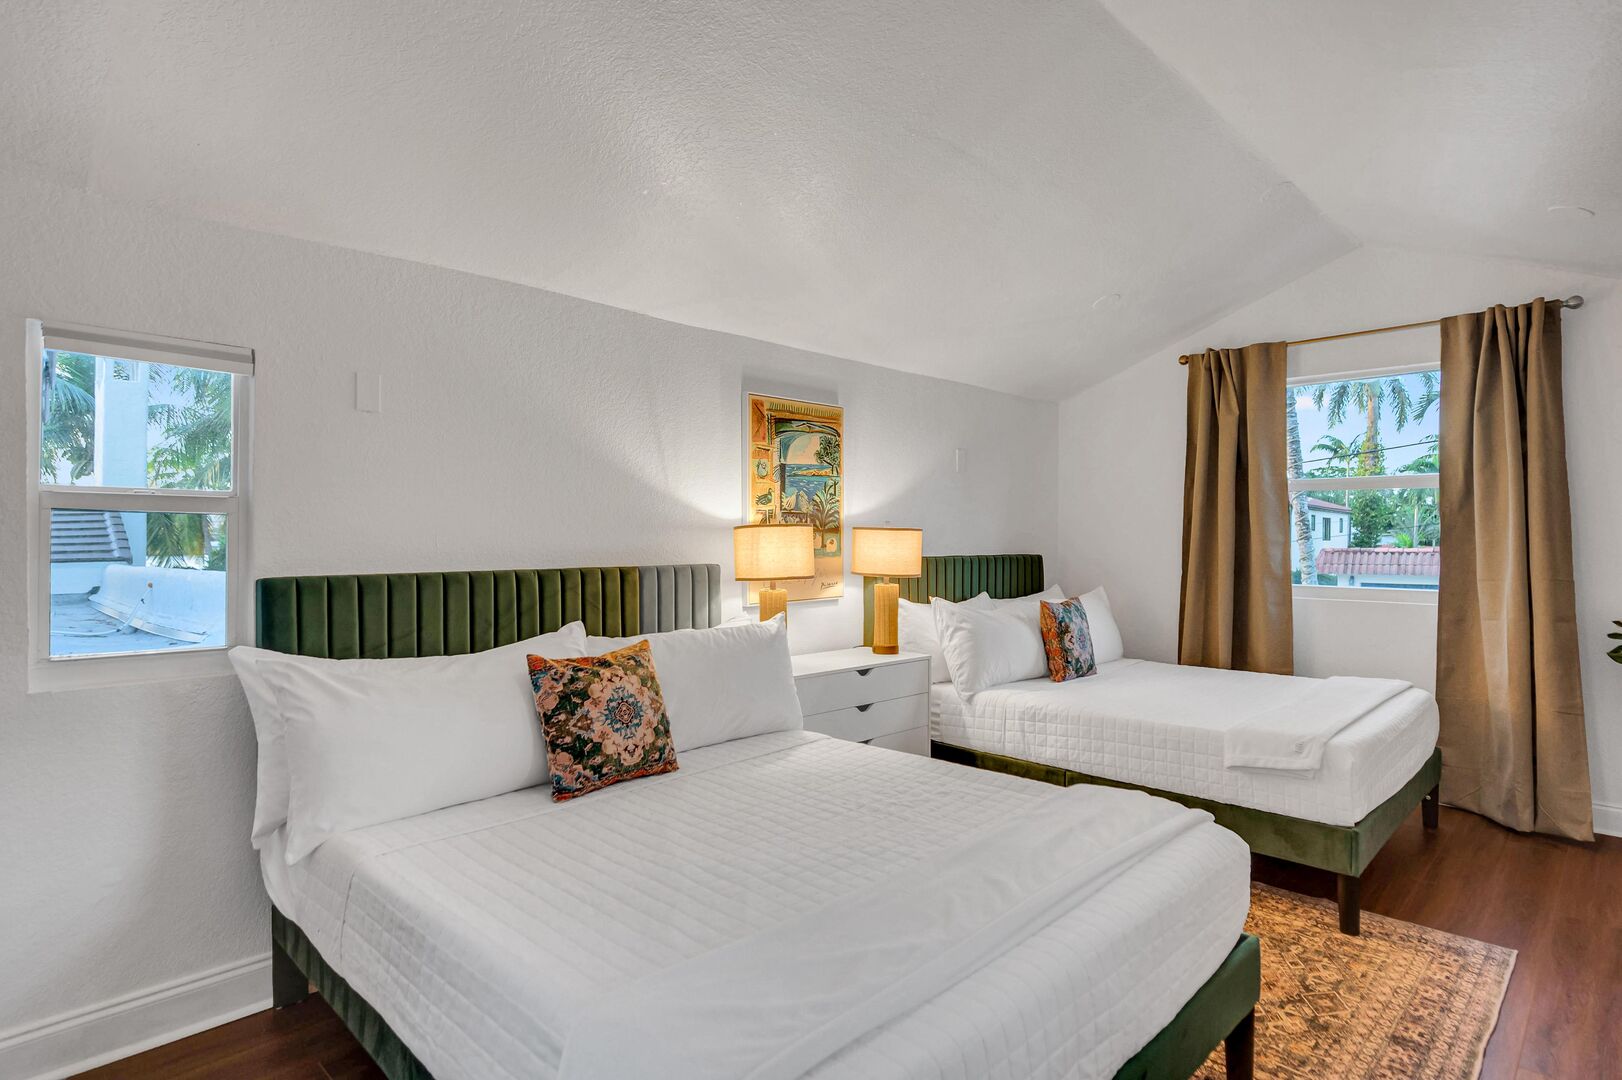 Bedroom six is located on the second floor accessible by the staircase in pool table lounge.